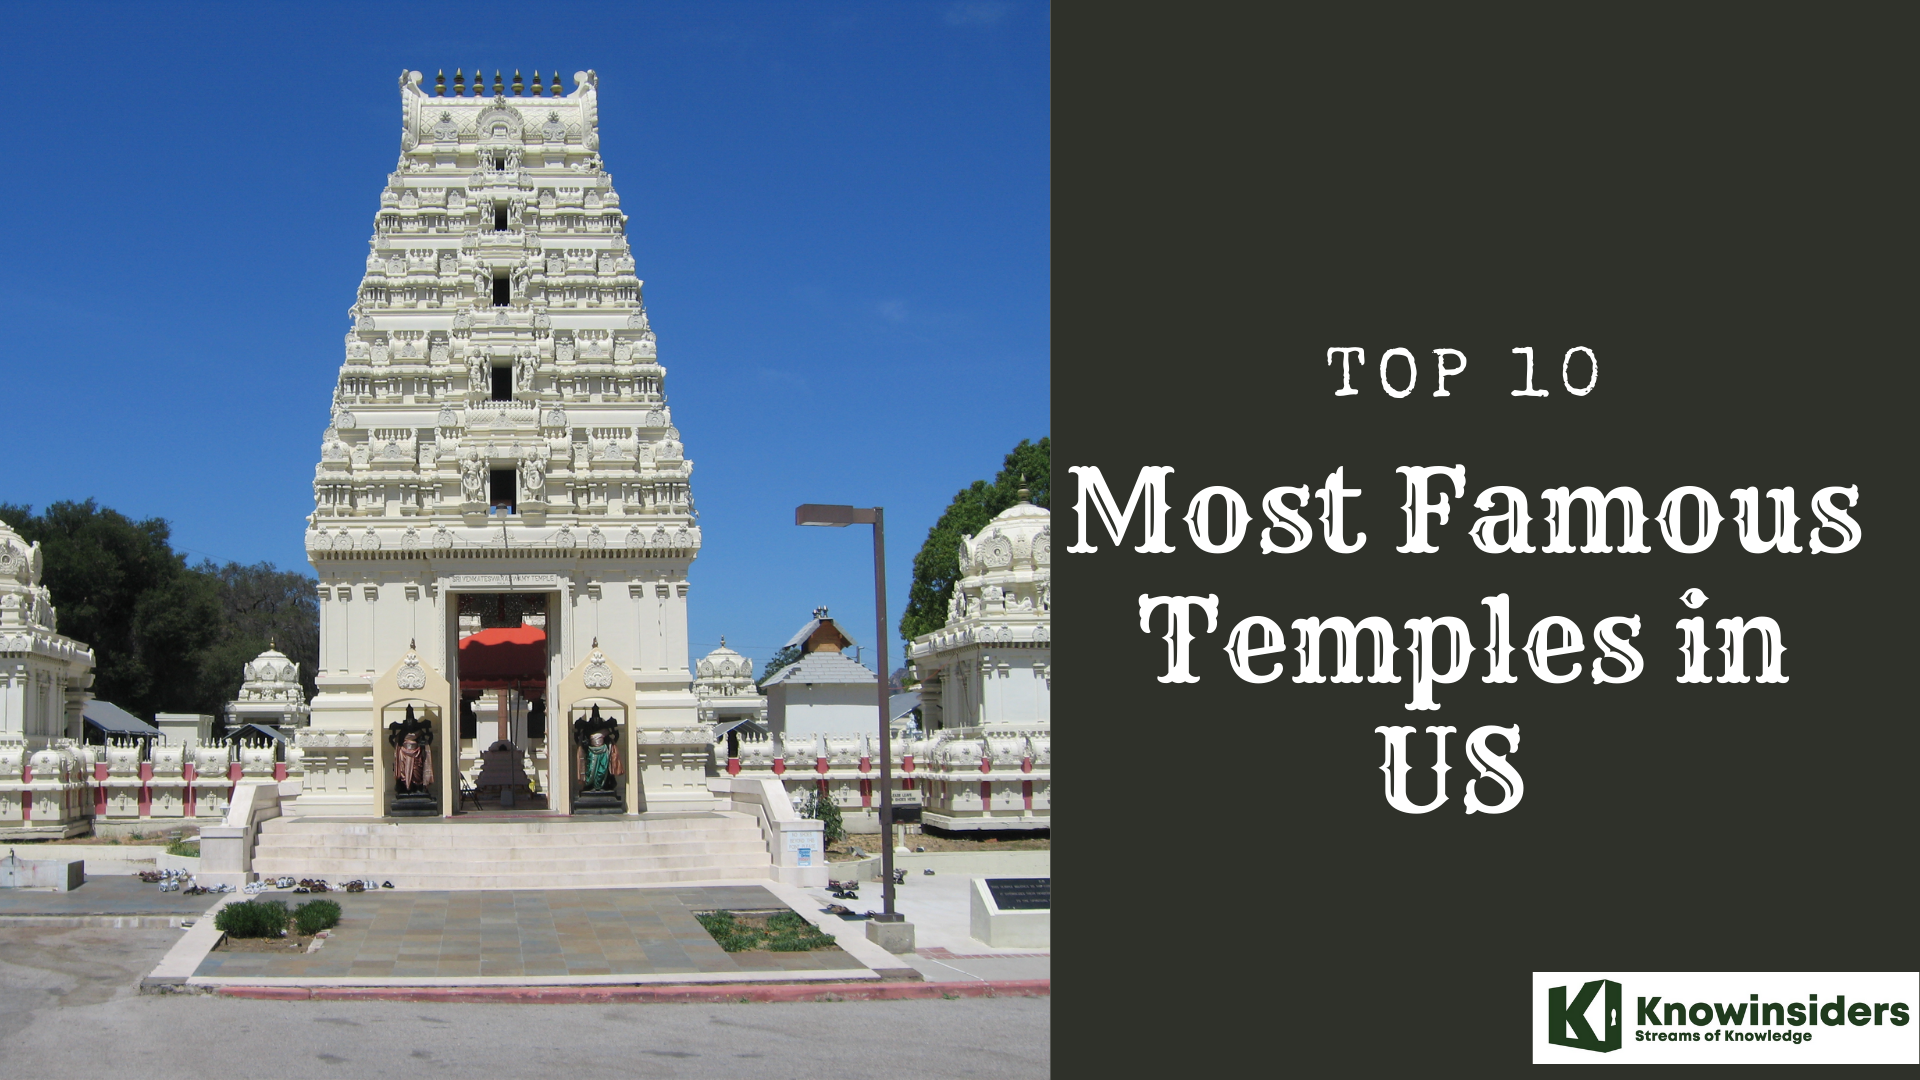 Top 10 Most Famous Temples in America